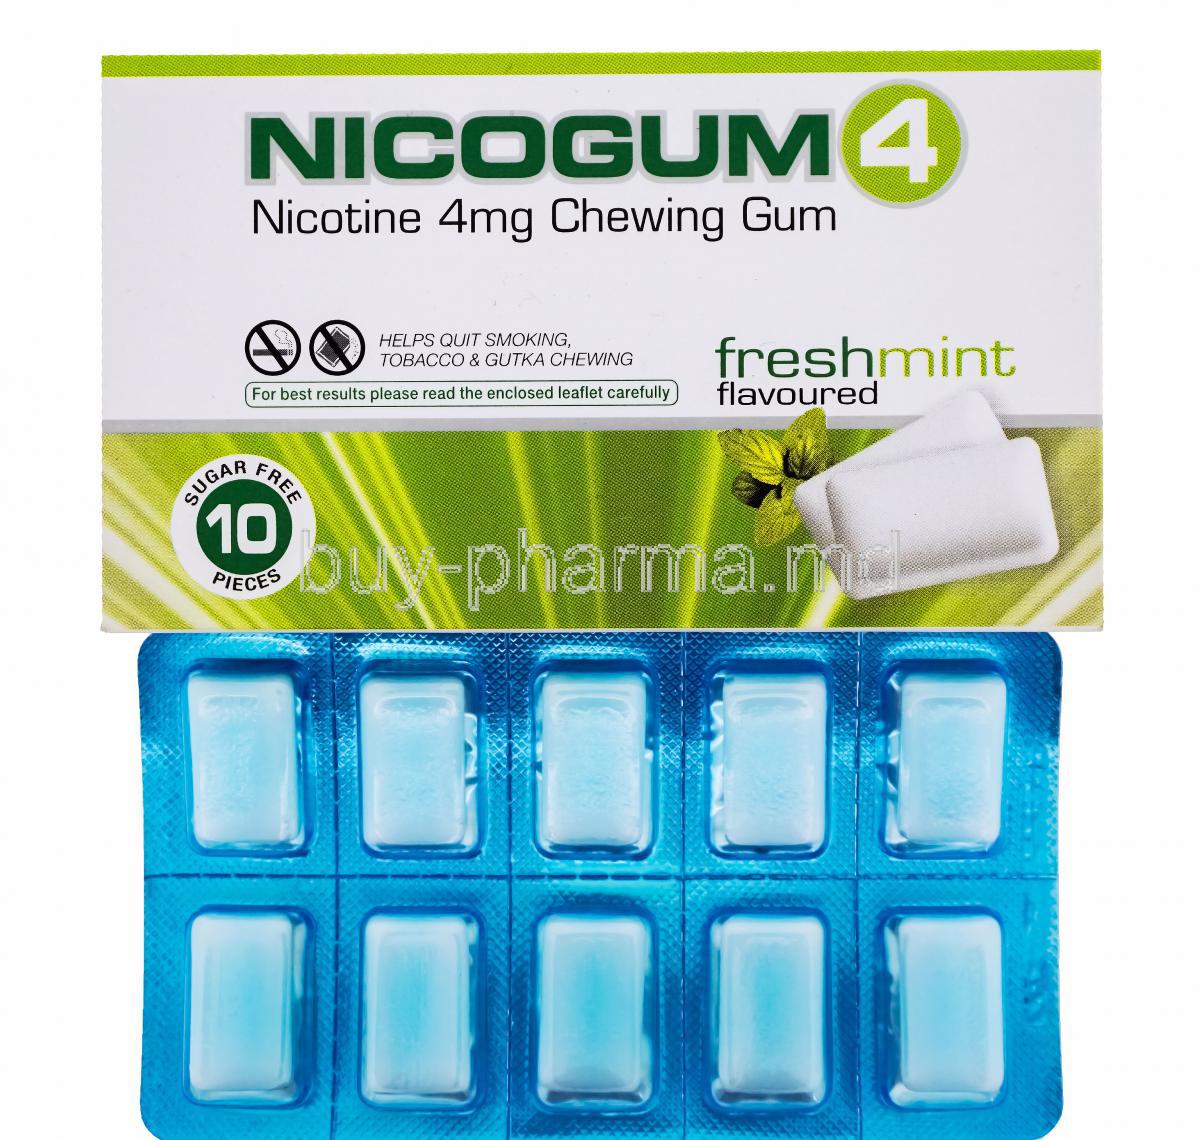 Nicotine Replacement Therapy Pastille/ Chewing Gum, Nicotine Polaorilex Gum USP 4mg, Nicogum4, Fresh mint flavoured, sugar free 10 pieces, Box front view with blister pack front view